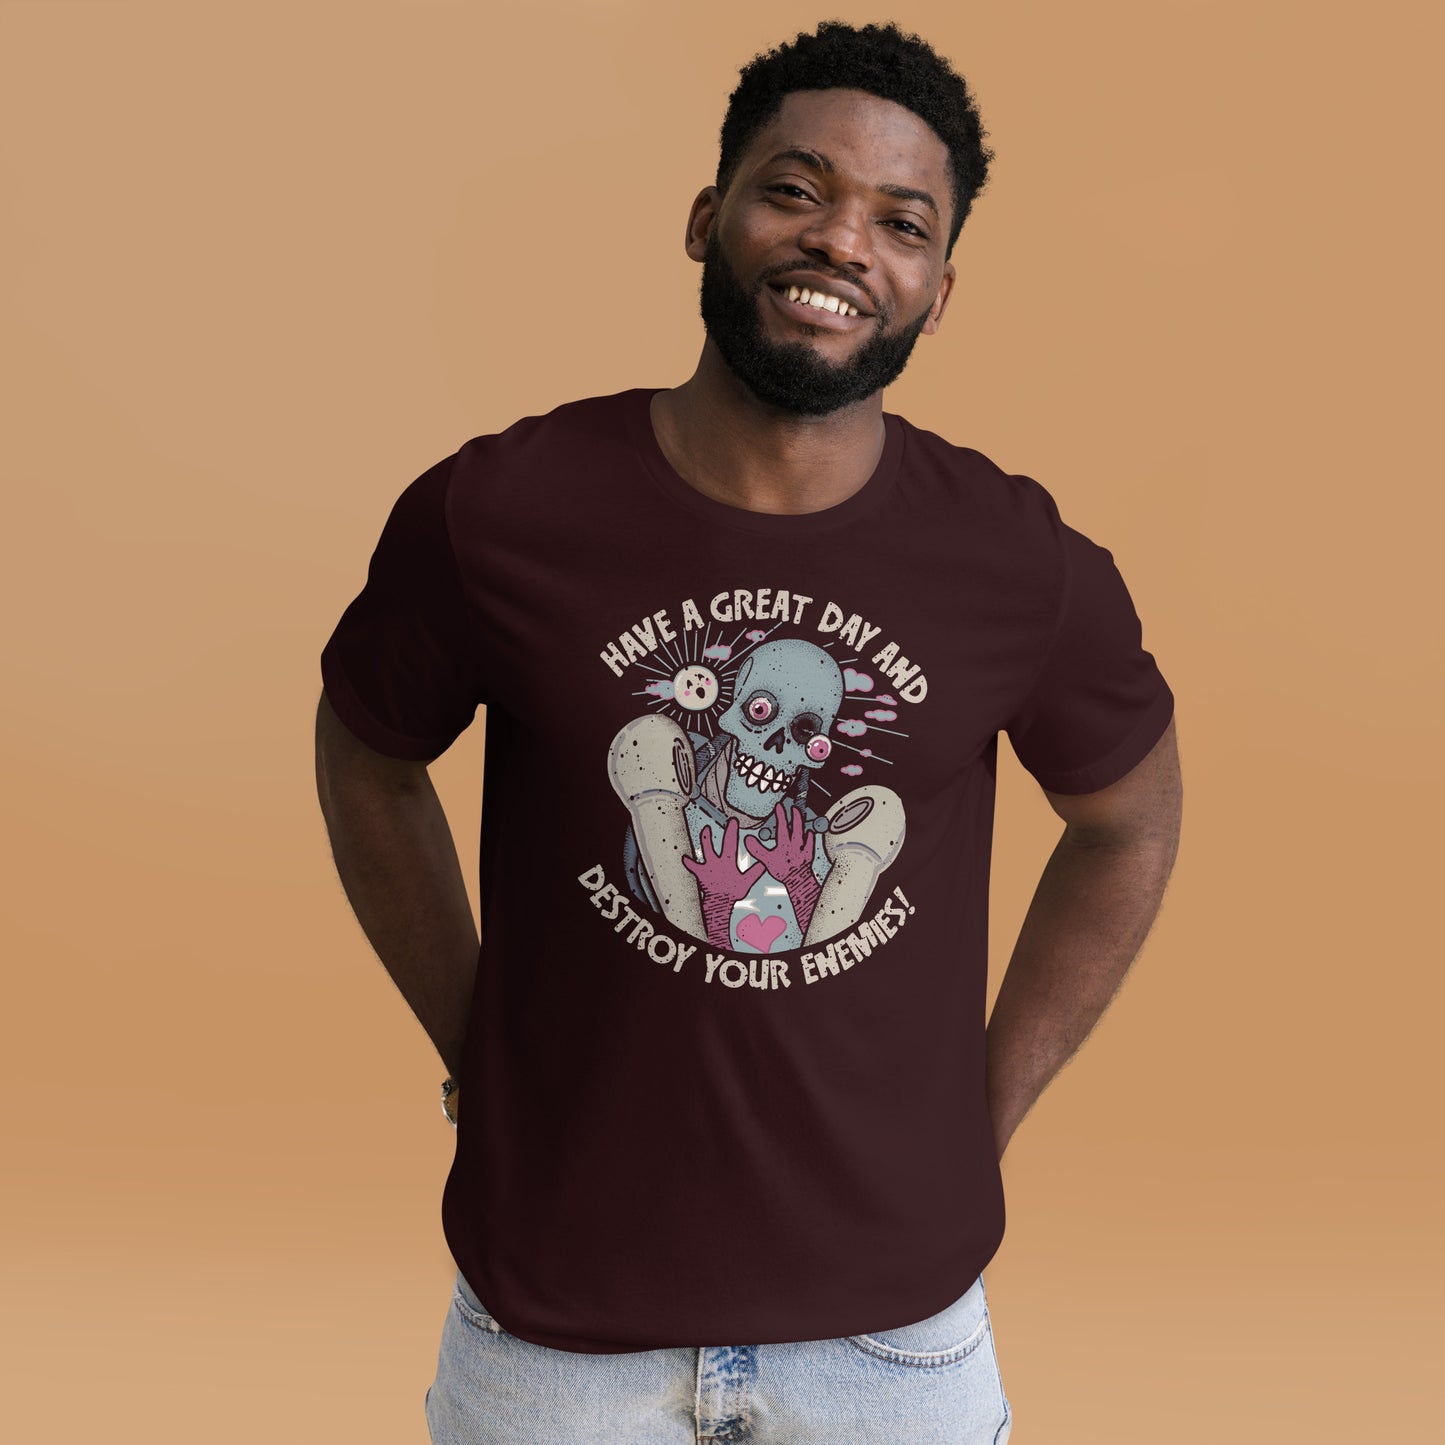 Kyle Have a Great Day T-Shirt (Unisex)